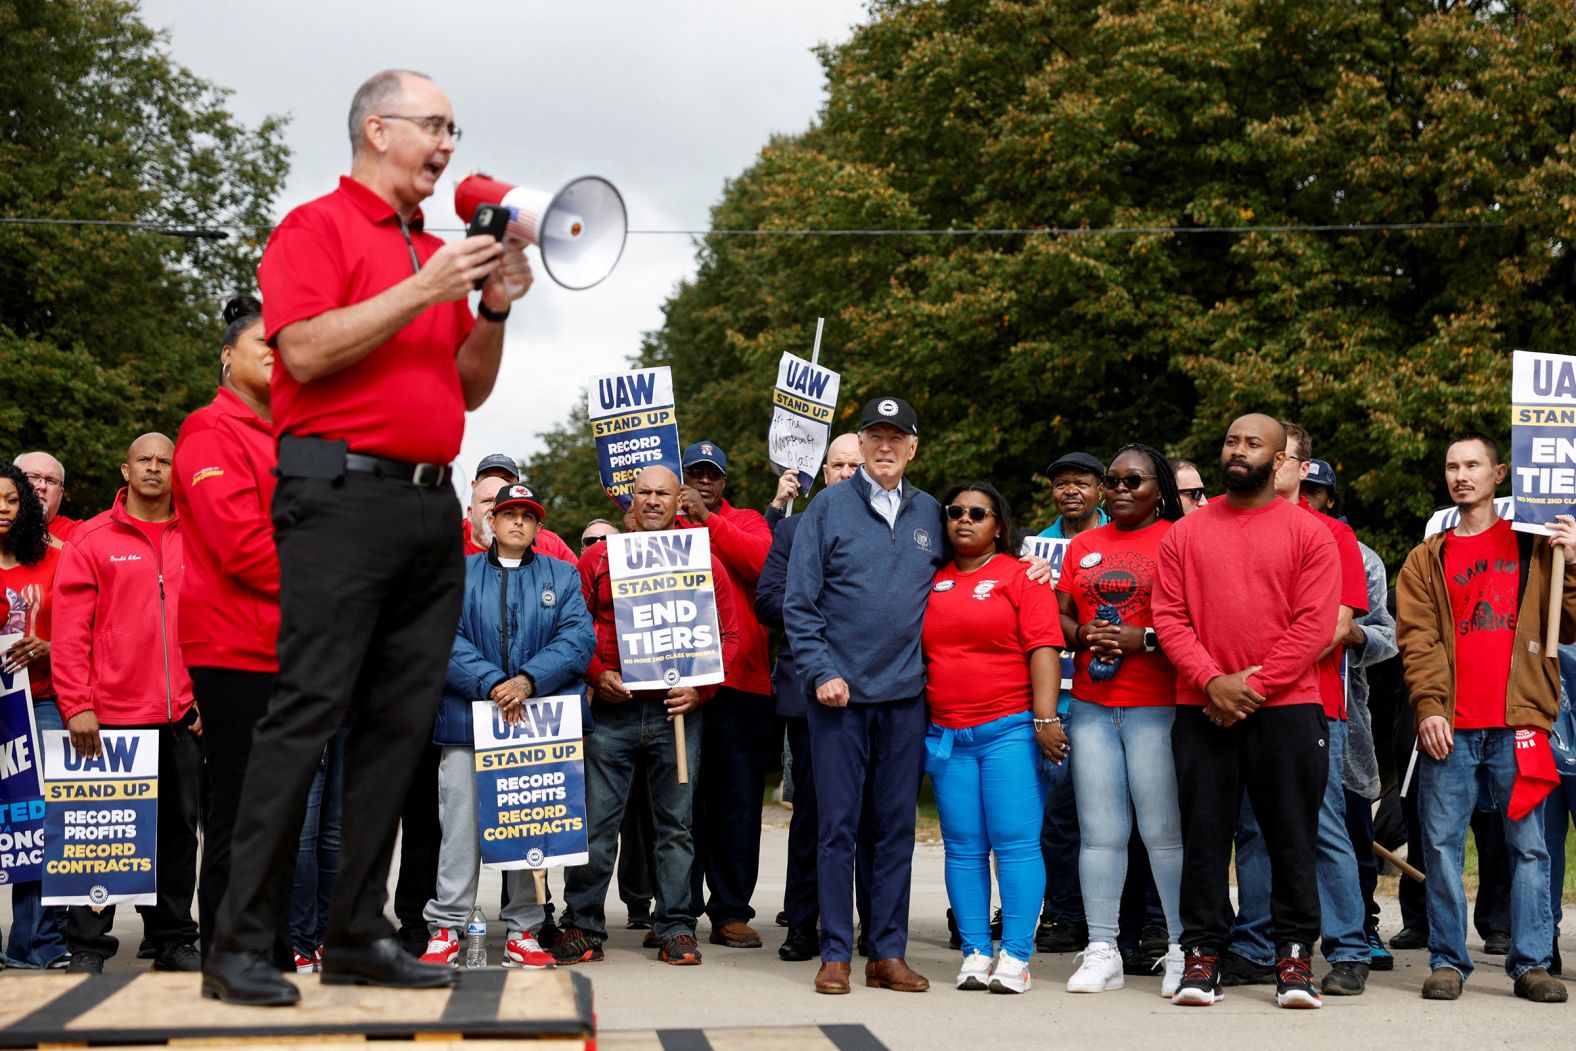 Shawn Fain, president of the United Auto Workers, speaks as Biden, center, joins <a href="https://www.cnn.com/2023/09/26/politics/biden-picket-line-michigan-uaw/index.html" target="_blank">striking union members </a>on the picket line in Belleville, Michigan. Biden made history by being the first sitting president to join a picket line.